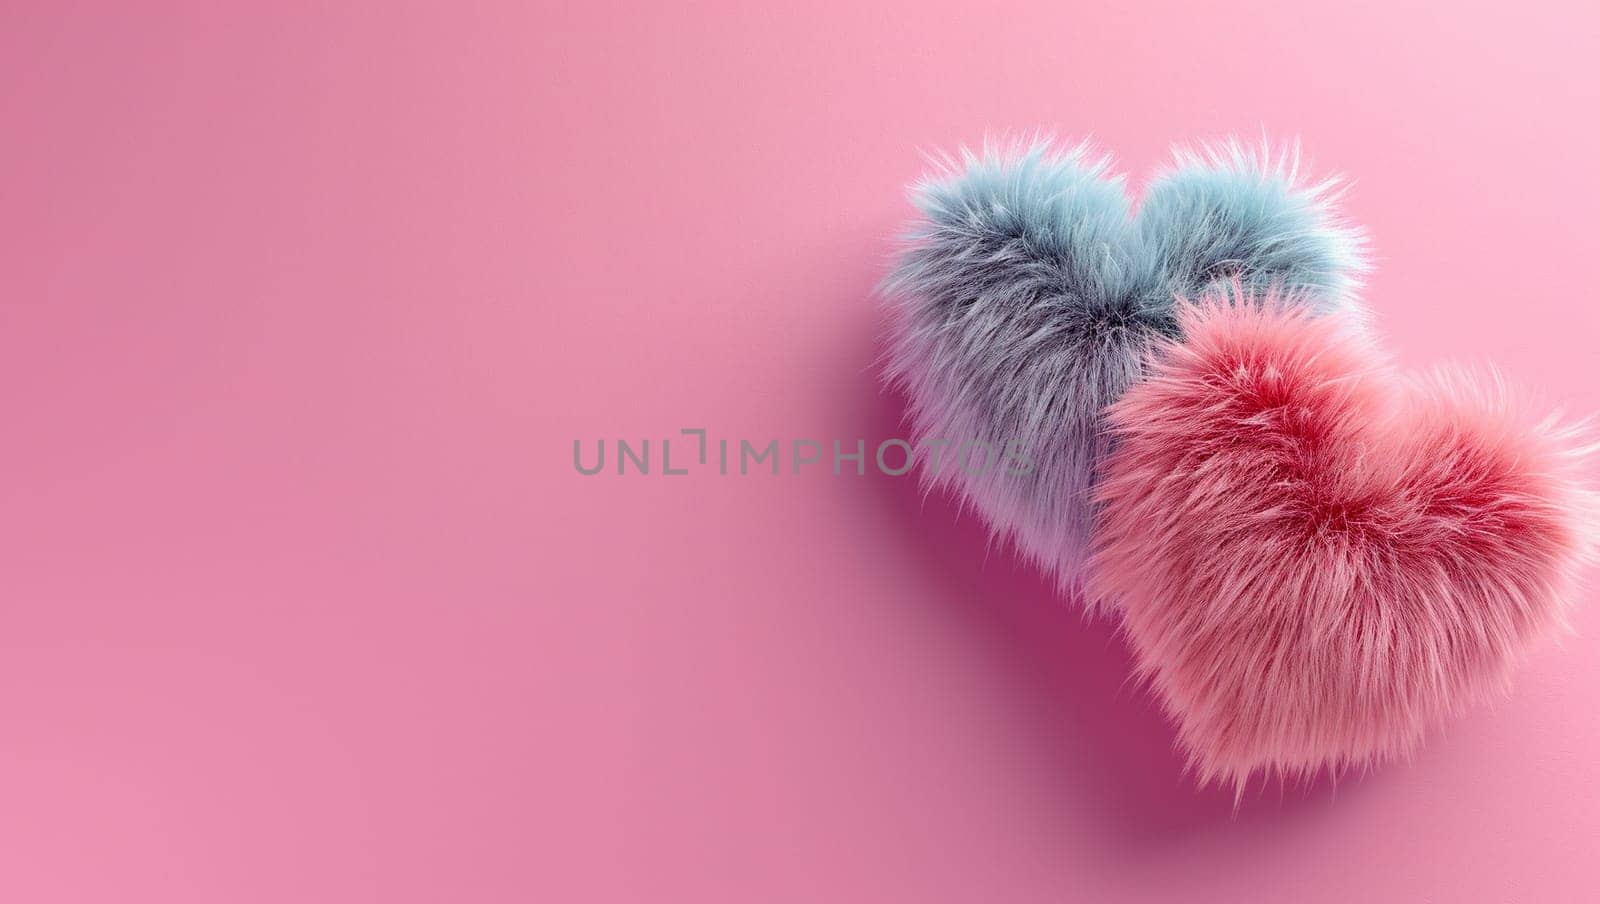 Several colorful fur hearts. Fur heart shapes on pink background, denoting love and care. Valentine's Day and happines. by Sneznyj